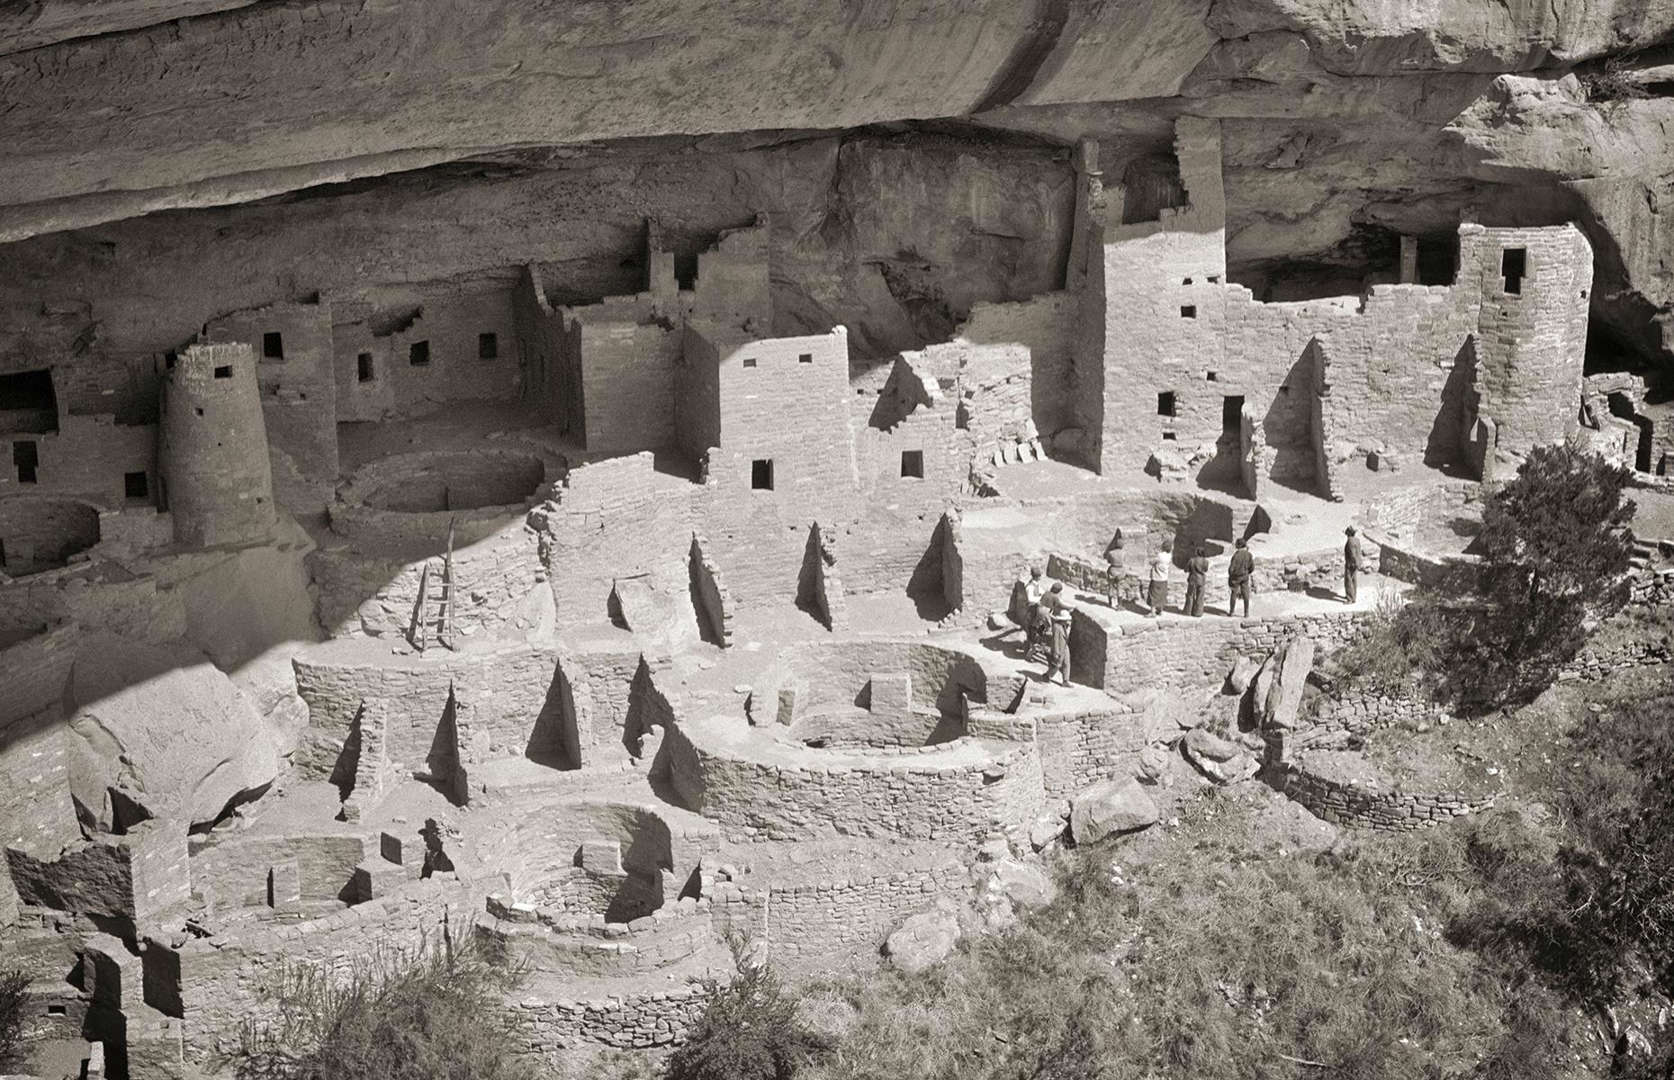 Slide 36 of 41: America's ancient landmarks are often forgotten, but sites across the States offer intriguing insights into the country's earliest settlers. Among them is Mesa Verde National Park and its Cliff Palace, an incredible 150-room dwelling built up by Ancestral Pueblo people from around AD 1190 to 1260. It's pictured here in the 1930s, and you can see tourists wandering about the walls and kivas.